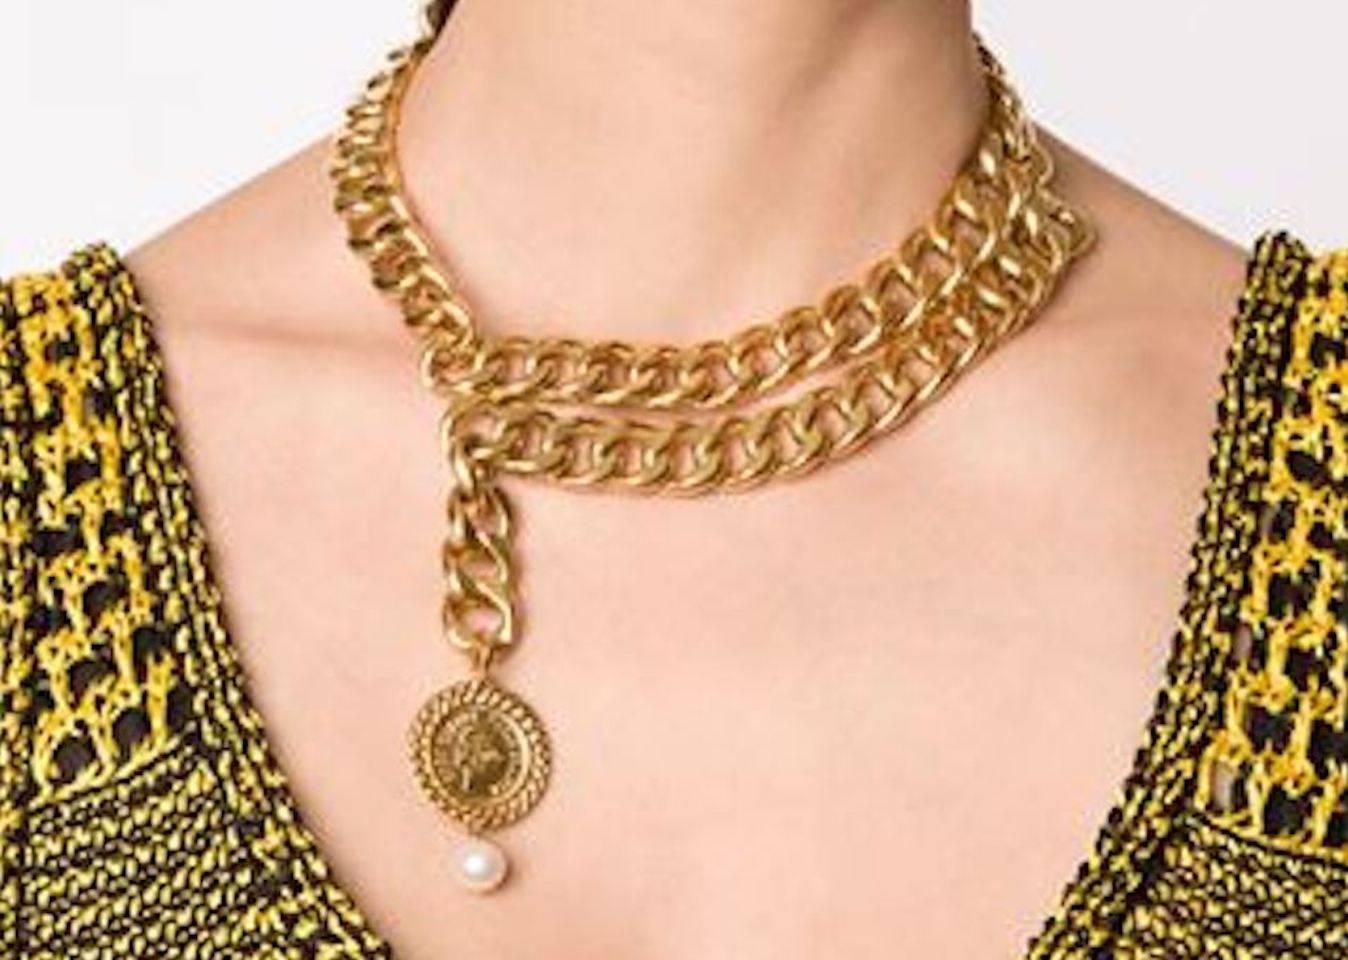 Chanel Vintage Gold Double Link Pearl Coin Medallion Choker Necklace in Box

Metal
Gold tone
Faux pearl
Hook closure
Made in France
Coin measures 1